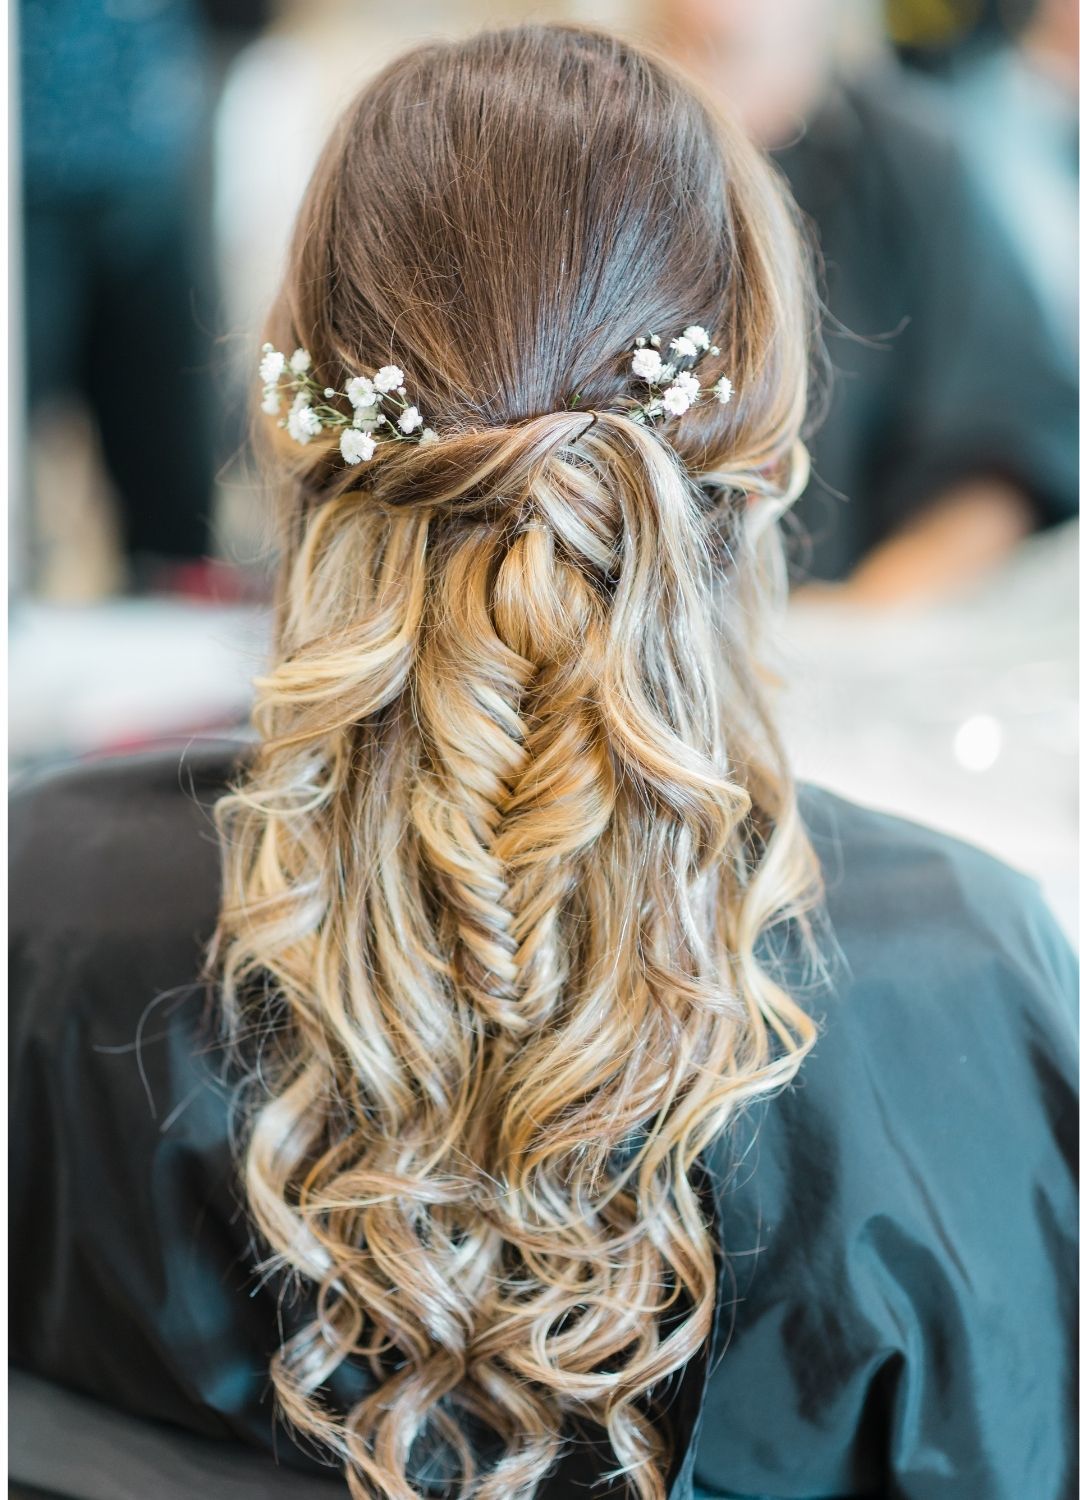 25 Graduation Hairstyles for Your Special Day - College Fashion